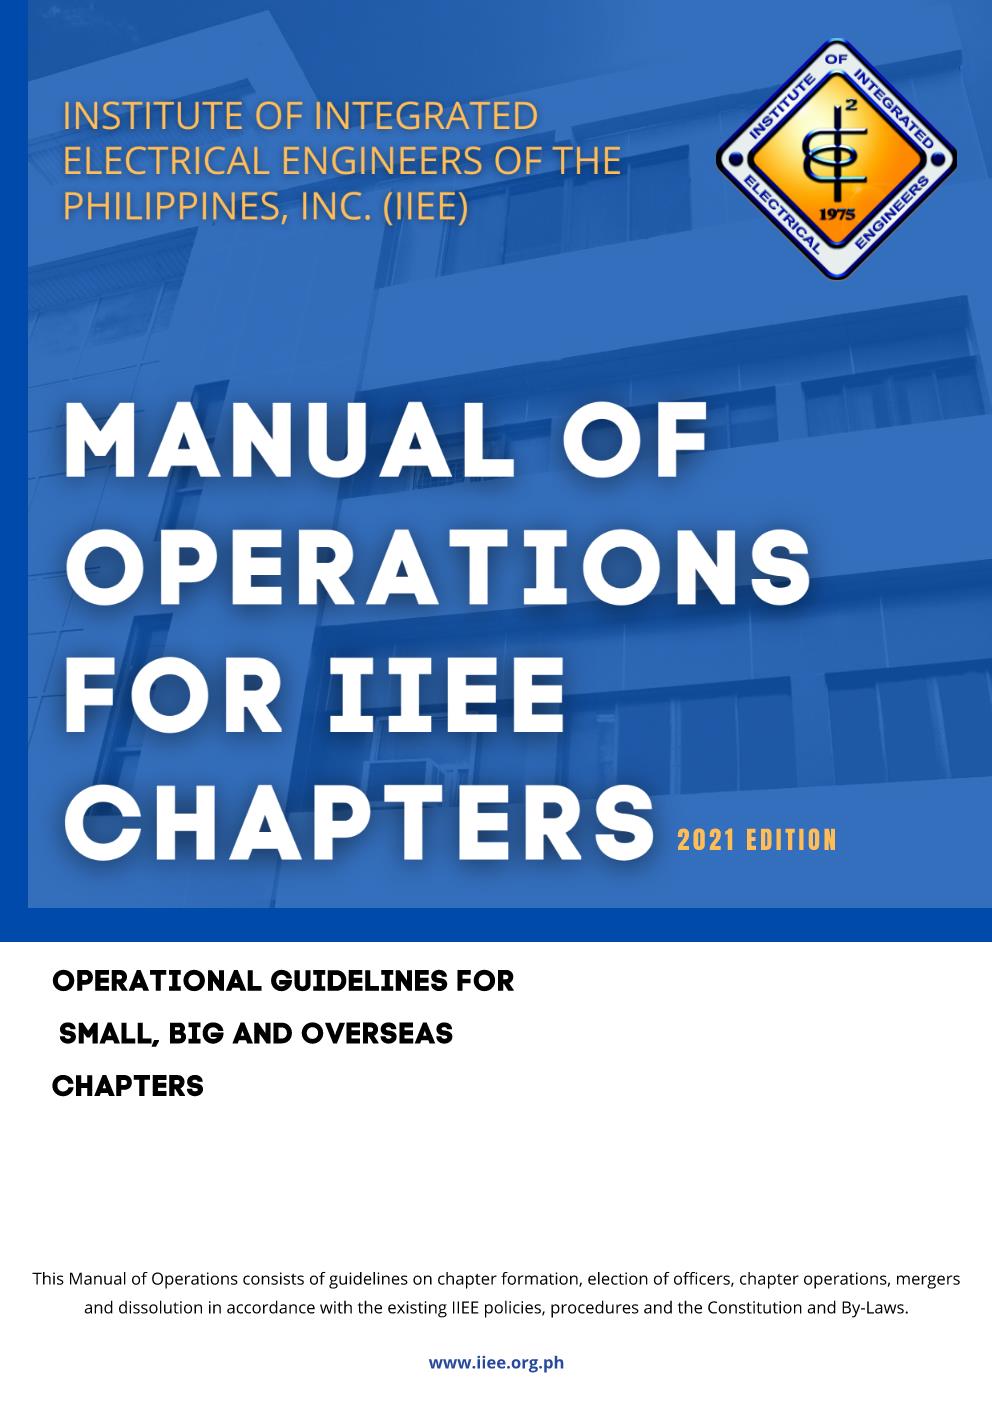 Manual of Operations for IIEE Chapters